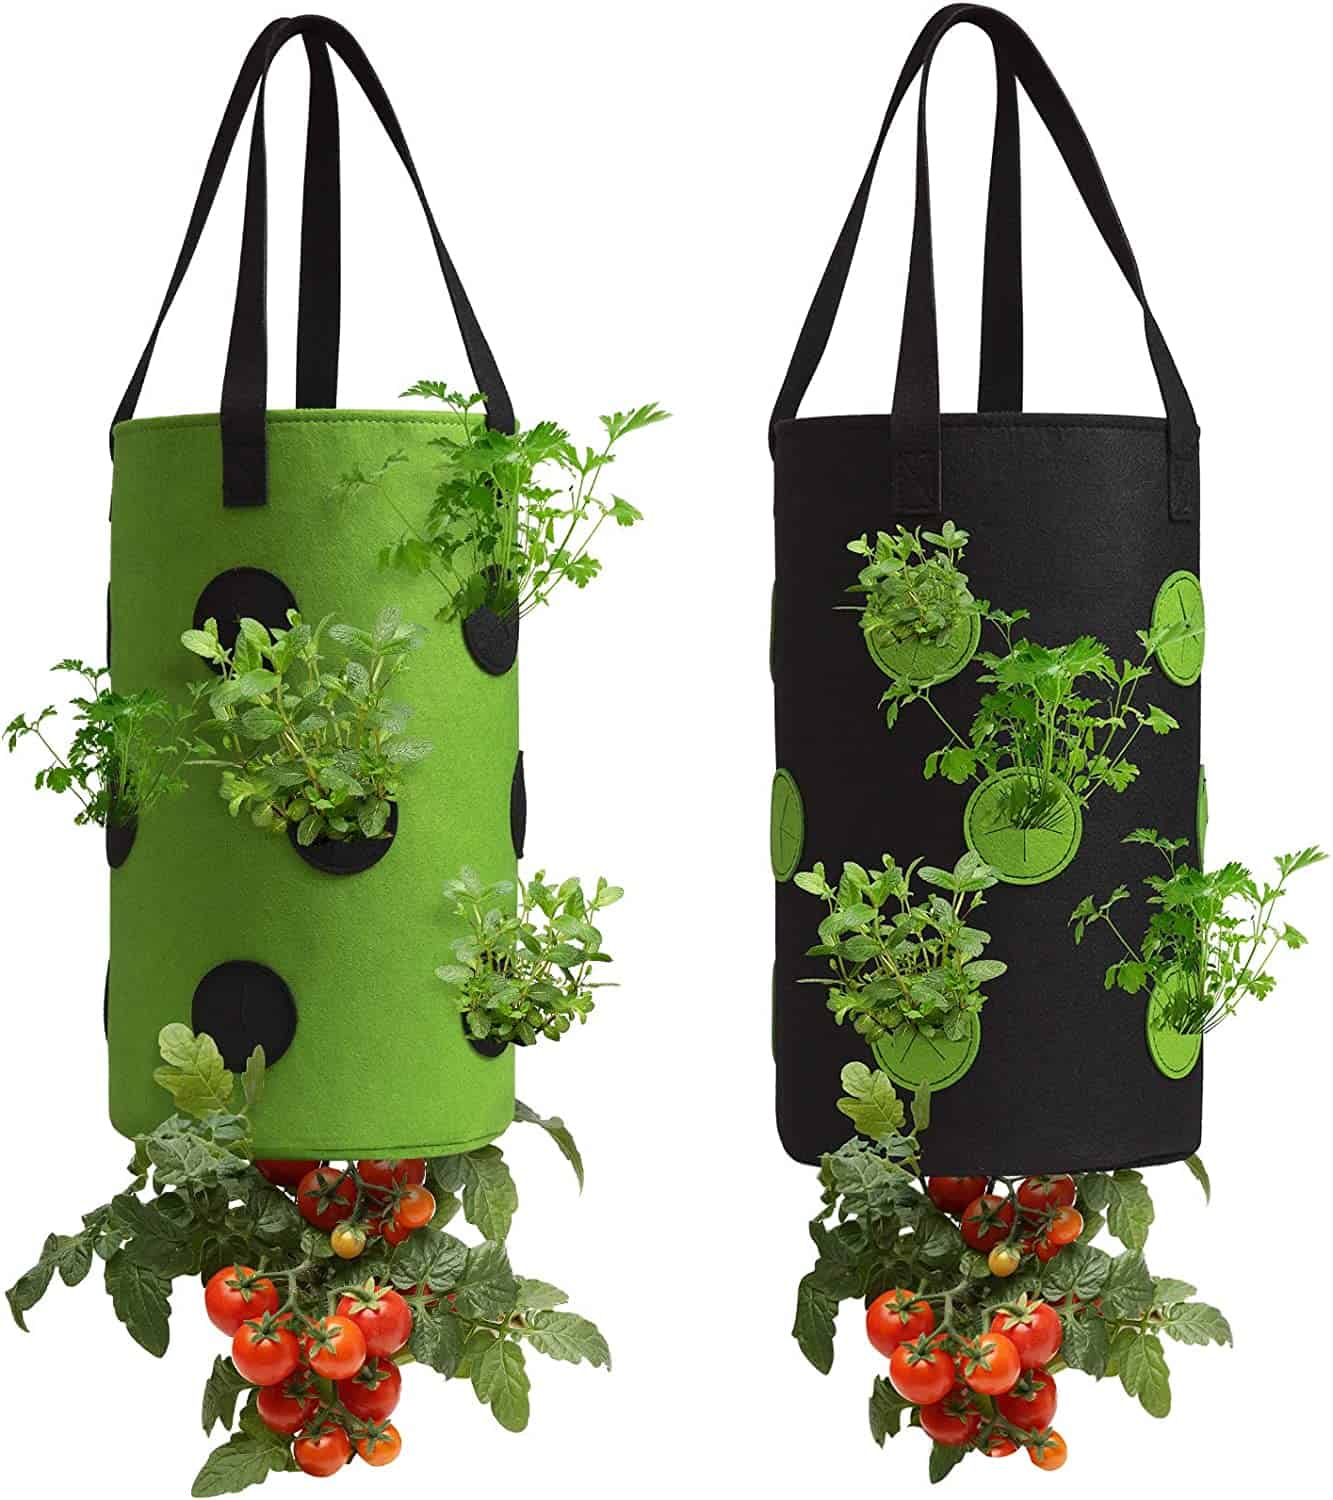 2 Pack Black and Green Upside Down Tomato & Herb Planter, Hanging Durable Aeration Fabric Strawberry Planter Bags